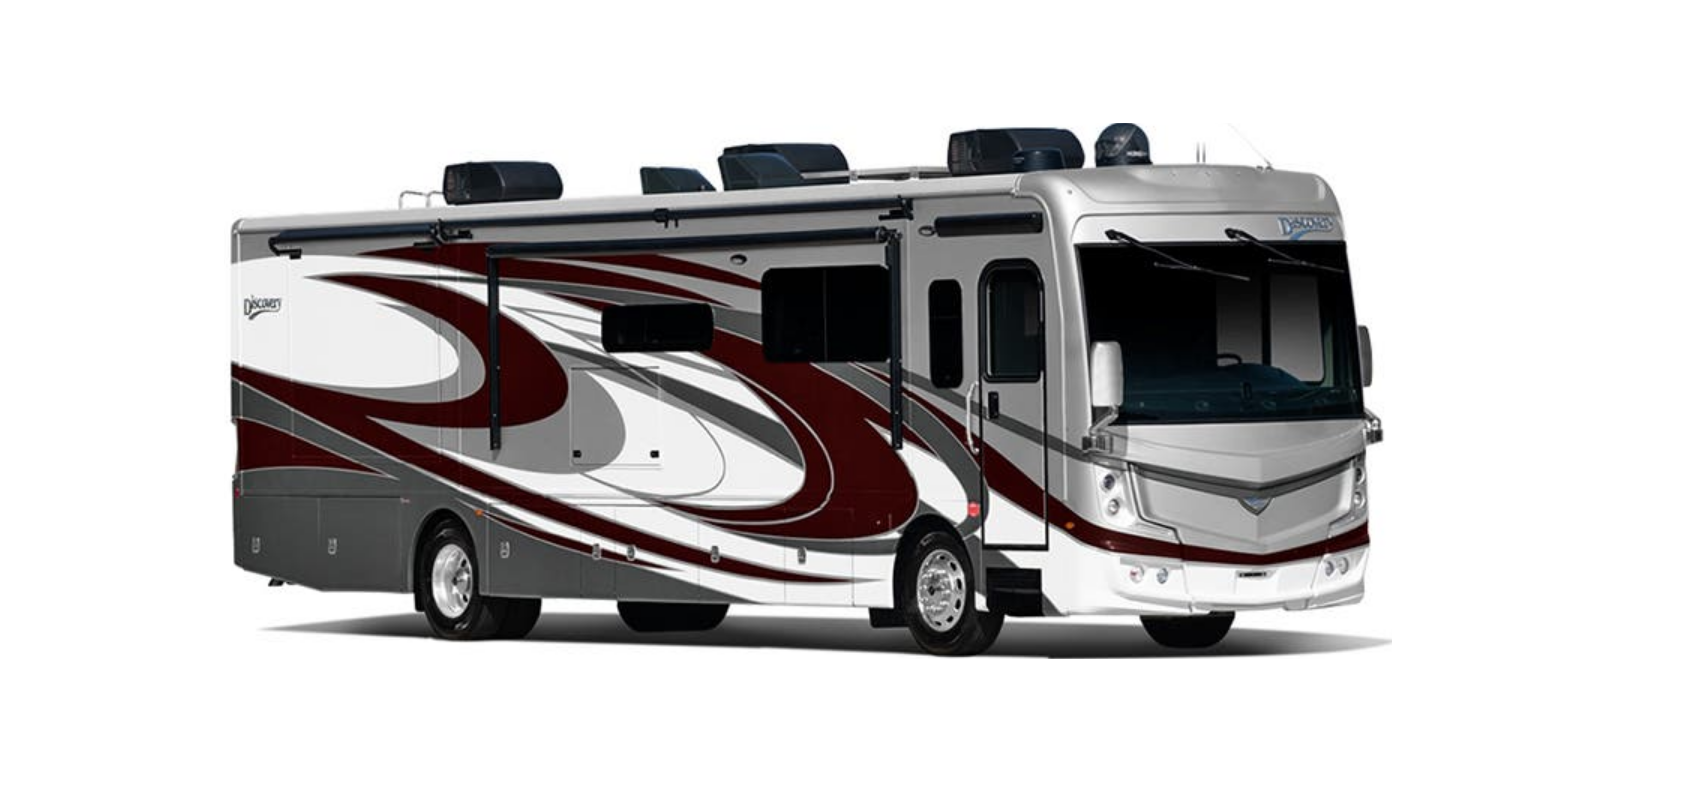 2021 Fleetwood RV Discovery featured